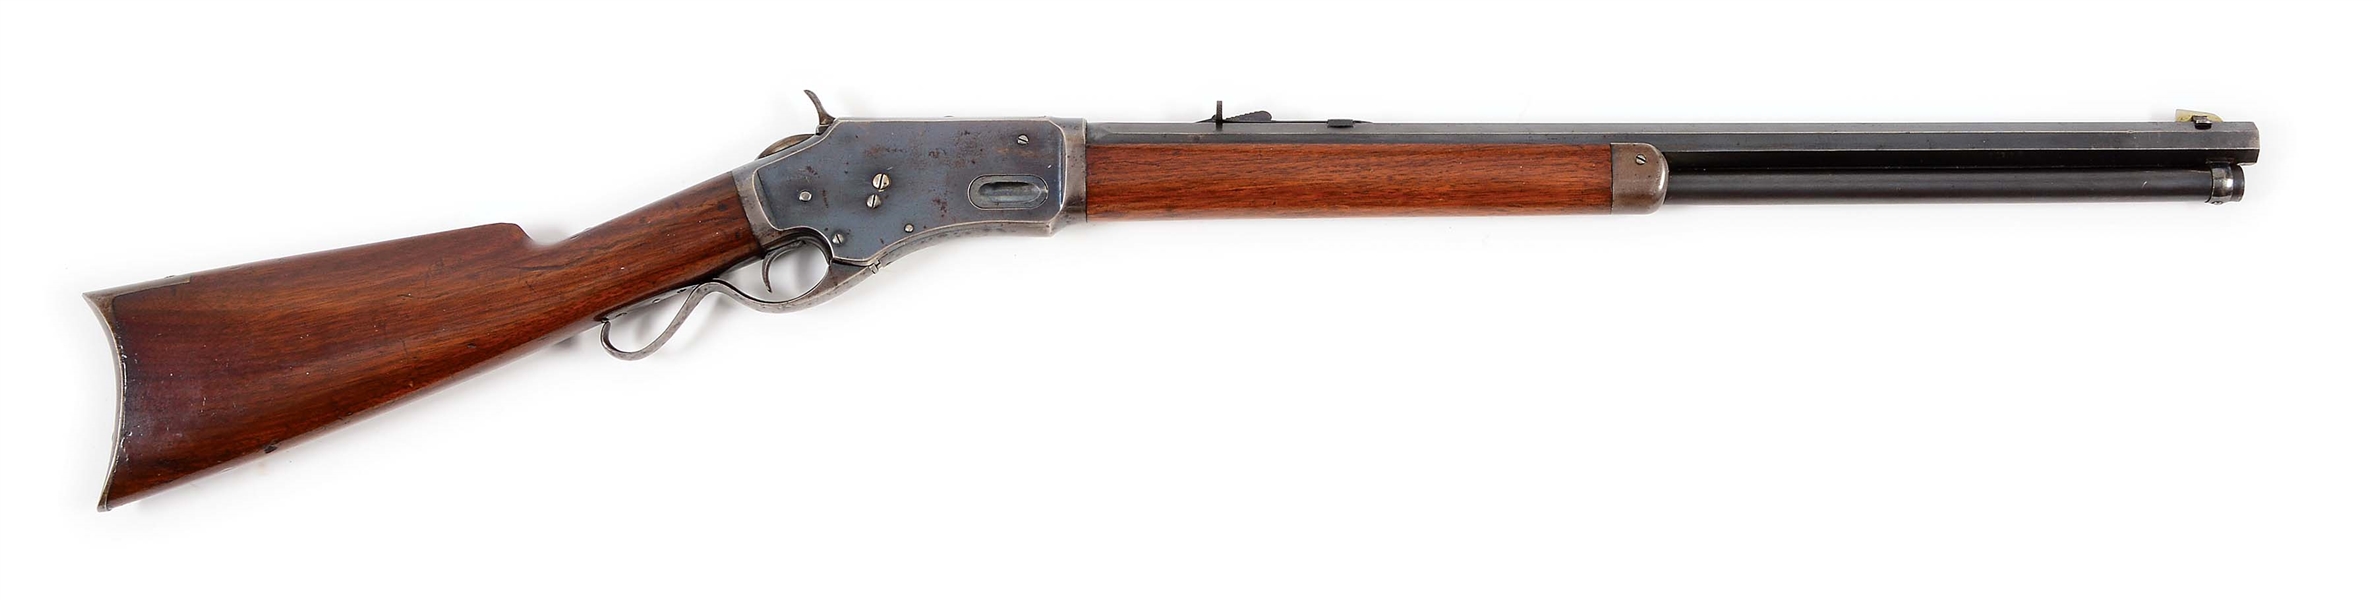 (A) WHITNEY KENNEDY LARGE FRAME LEVER ACTION SPORTING RIFLE.